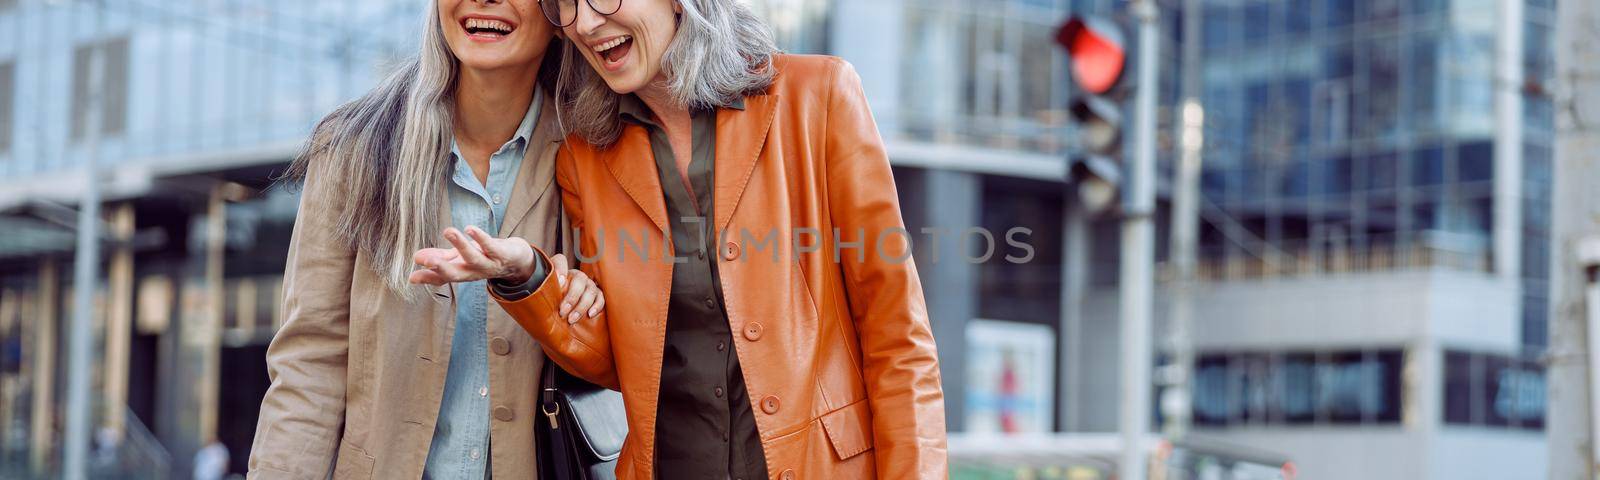 Pretty mature women with lot of shopping bags laugh on city street by Yaroslav_astakhov